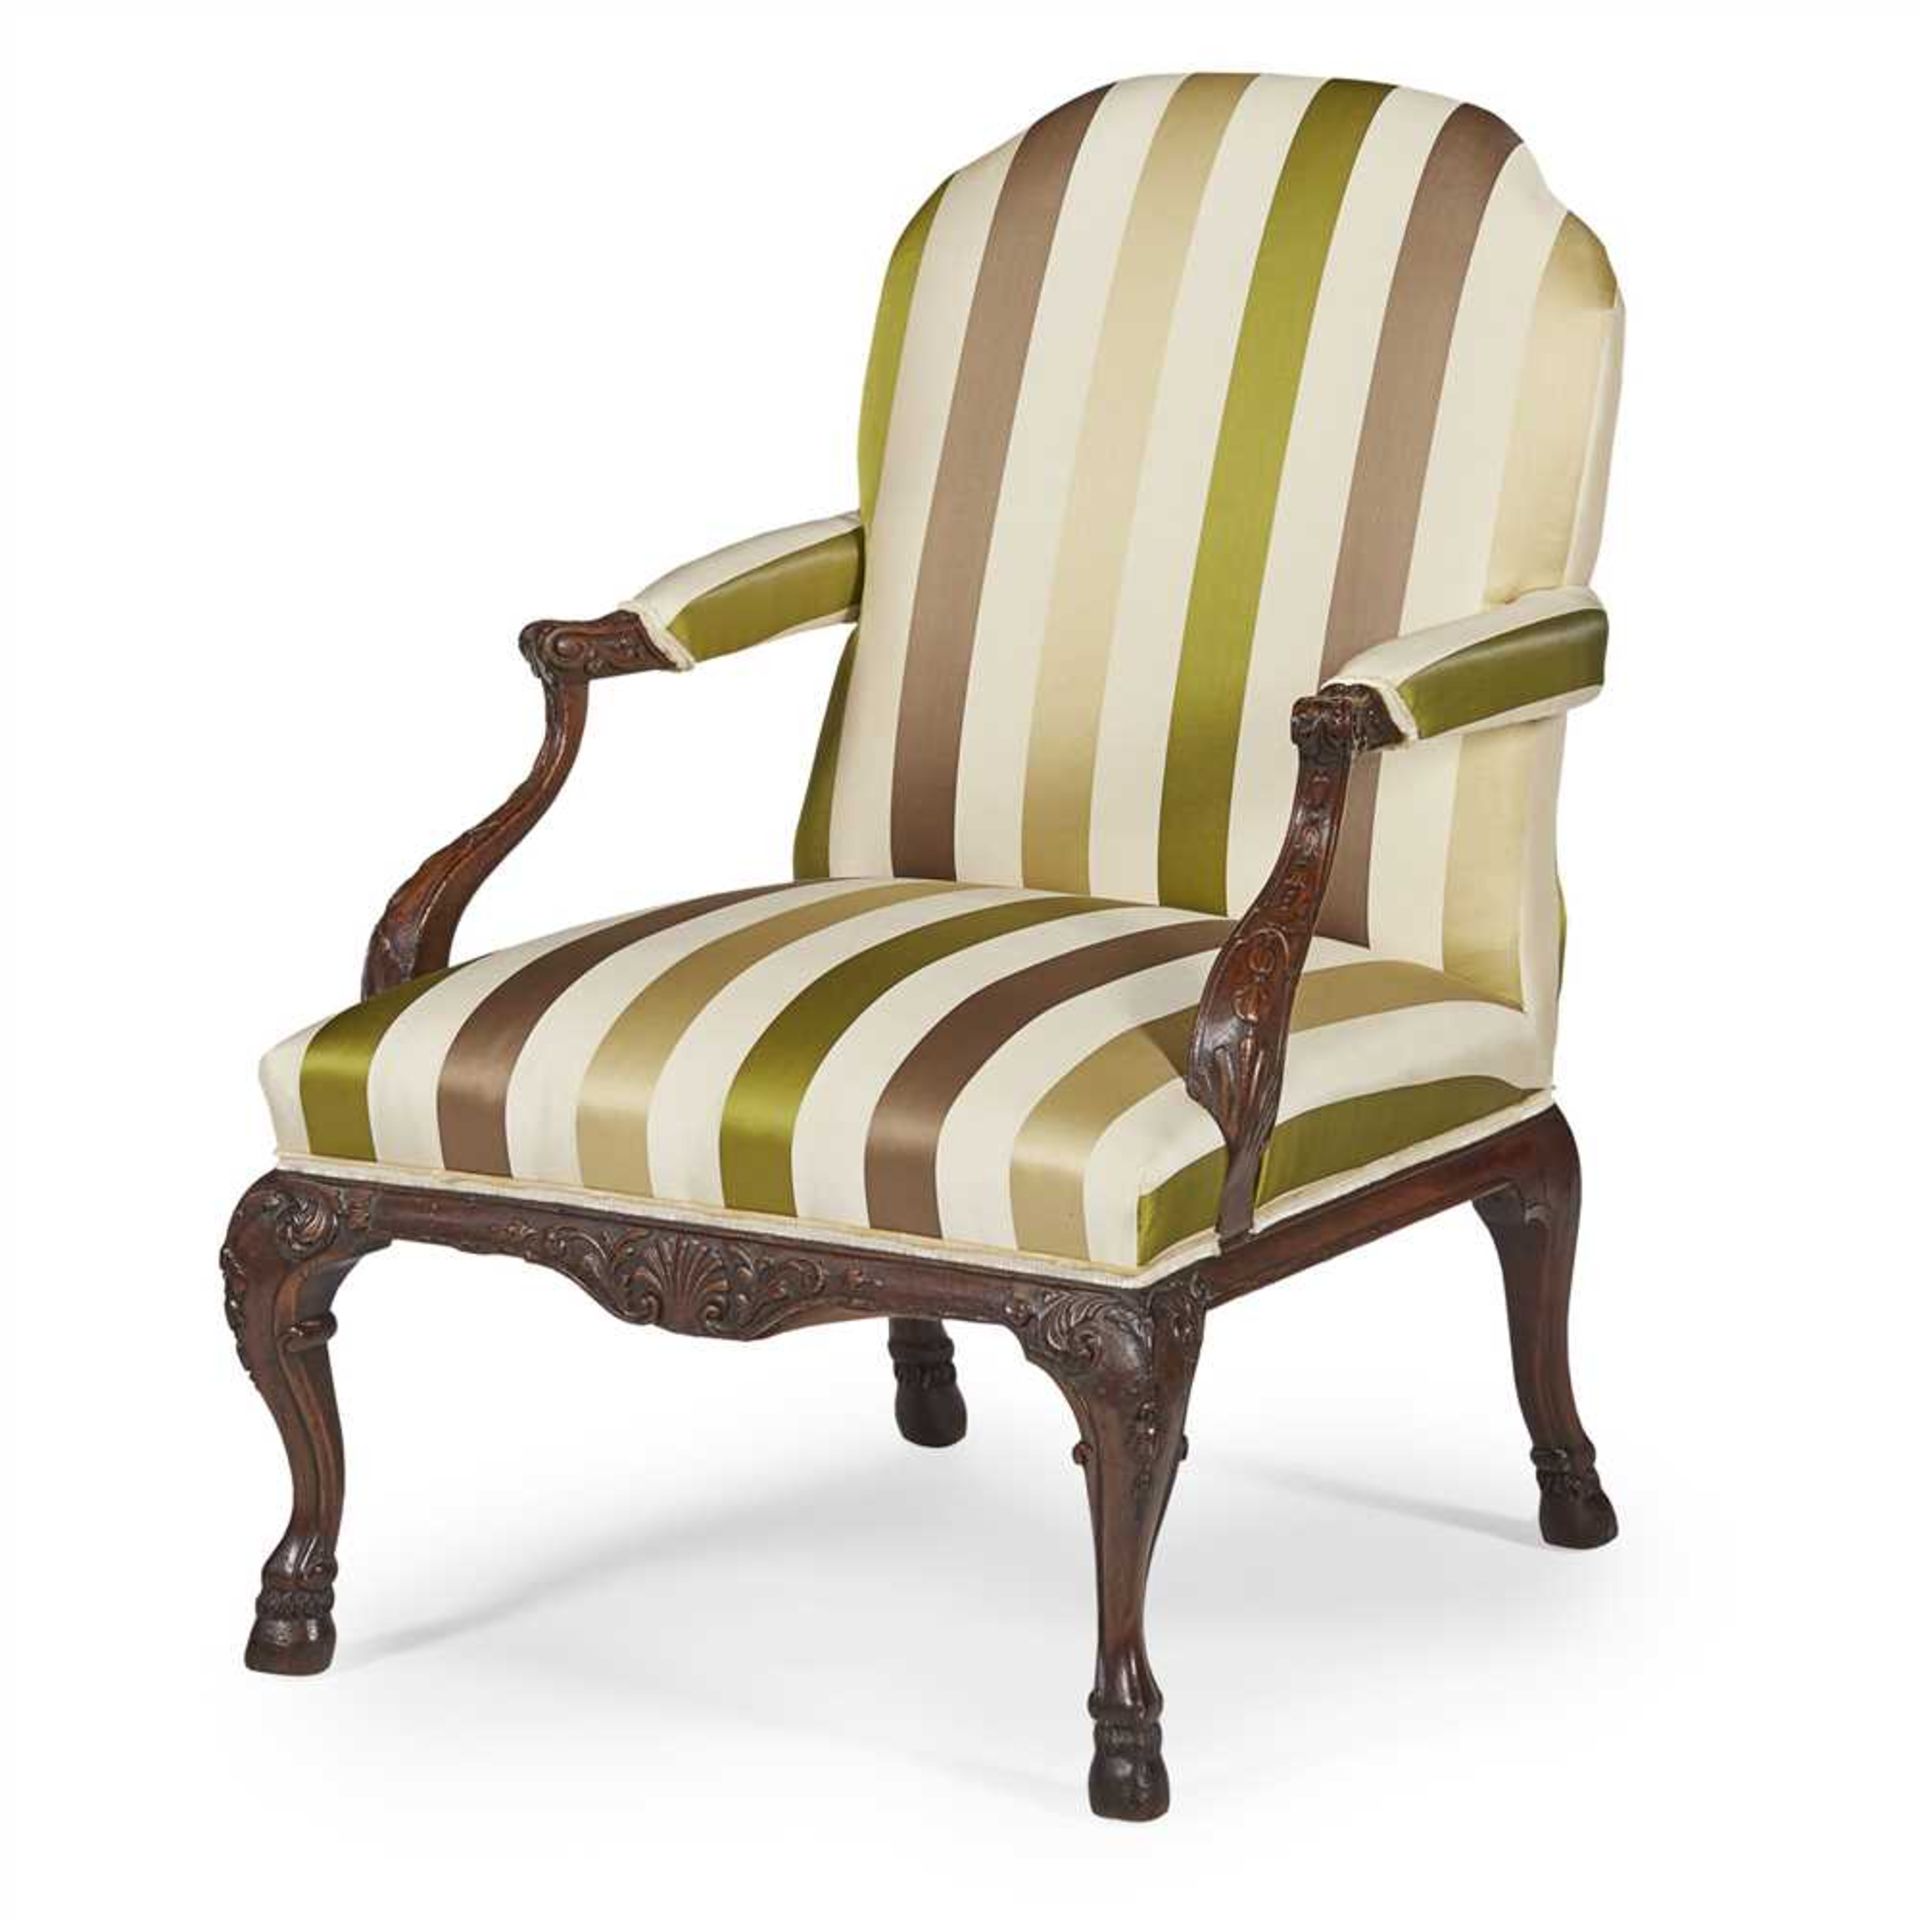 GEORGE II STYLE MAHOGANY FRAME OPEN ARMCHAIR 20TH CENTURY - Image 2 of 2